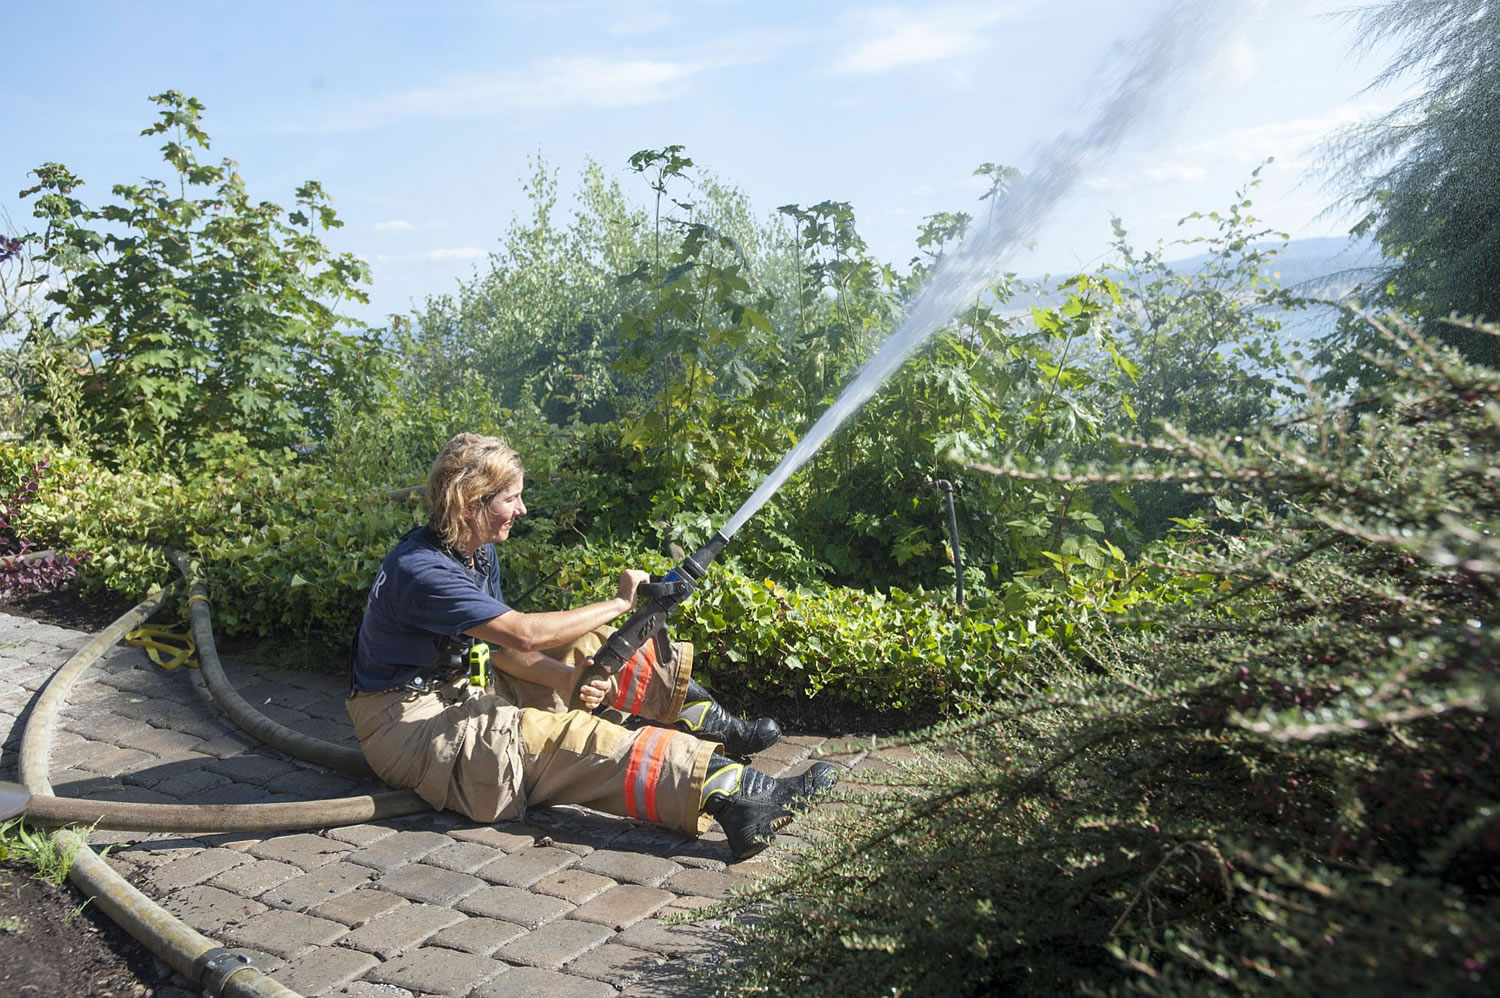 Fire fighter Heidi Parr in action during a fire on Buena Viata Drive in Vancouver on Wednesday. Firefighters fought multiple house fires on Wednesday. The first started at about 4:45 p.m. as a brush fire and spread to a house in the 5700 block of Buena Vista Drive.